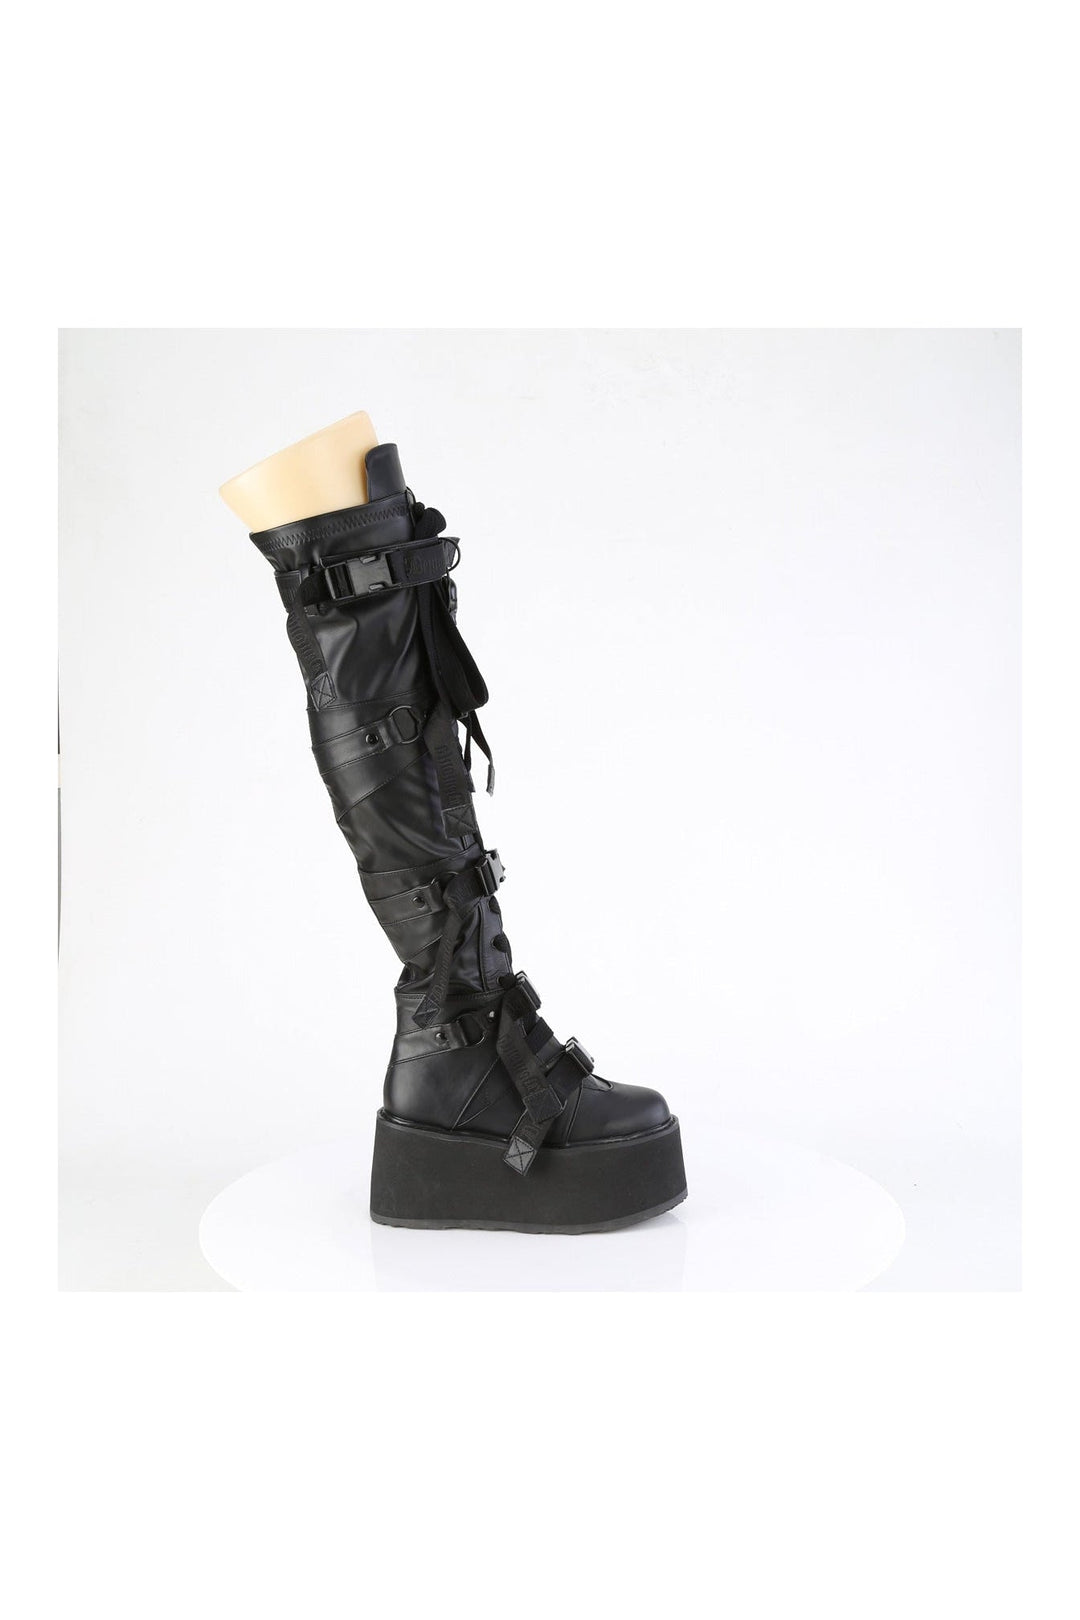 DAMNED-325 Black Vegan Leather Thigh Boot